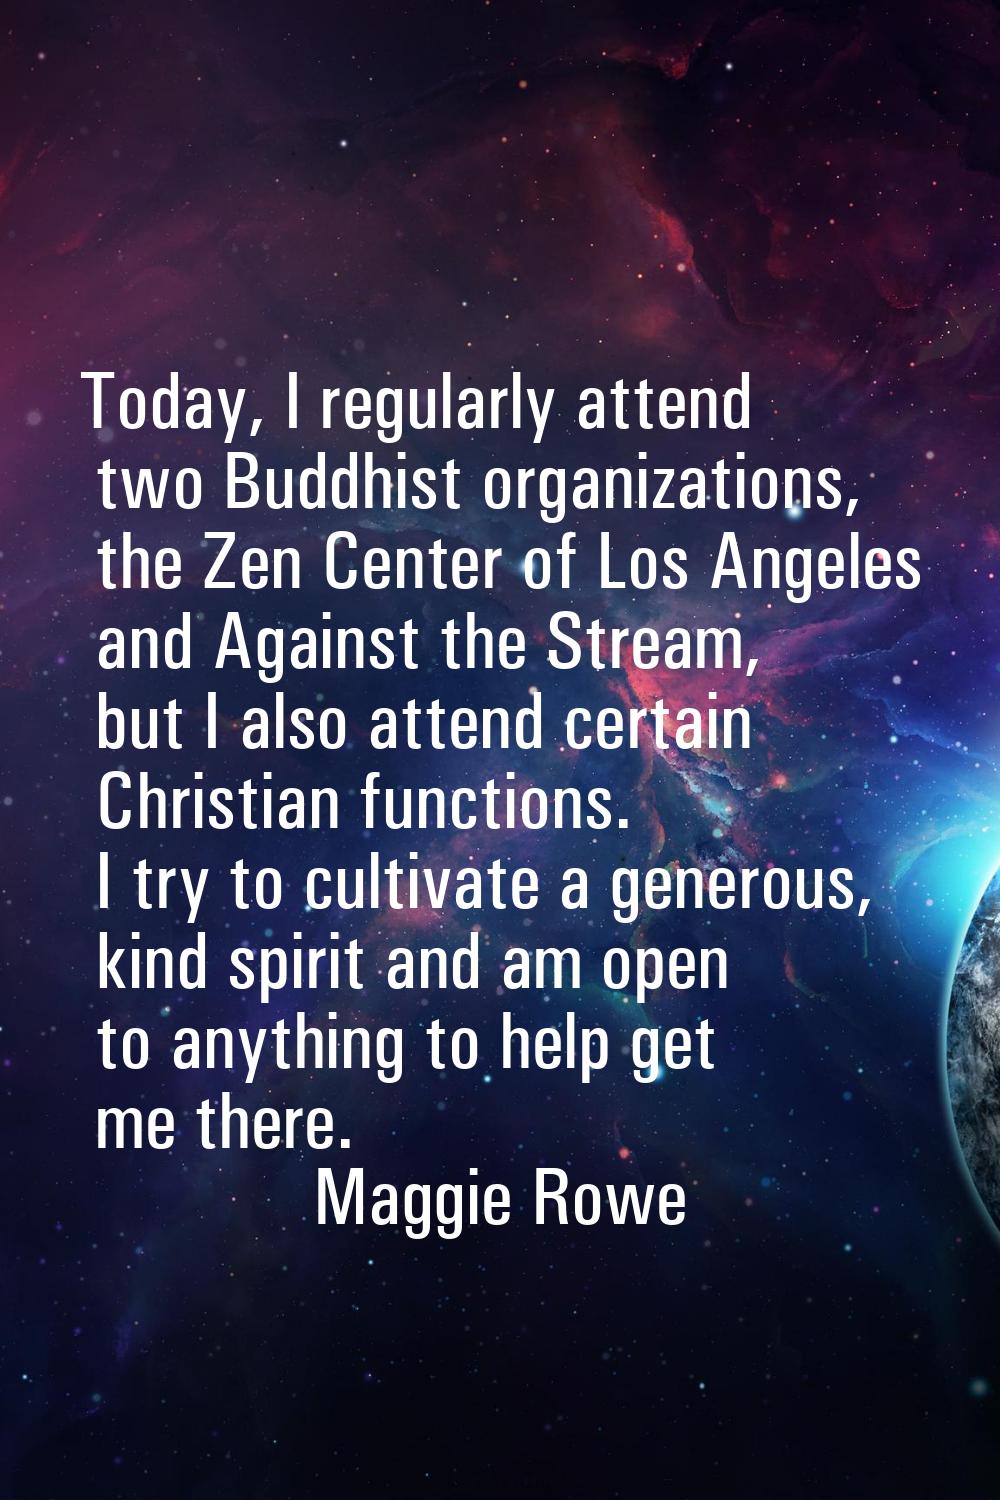 Today, I regularly attend two Buddhist organizations, the Zen Center of Los Angeles and Against the